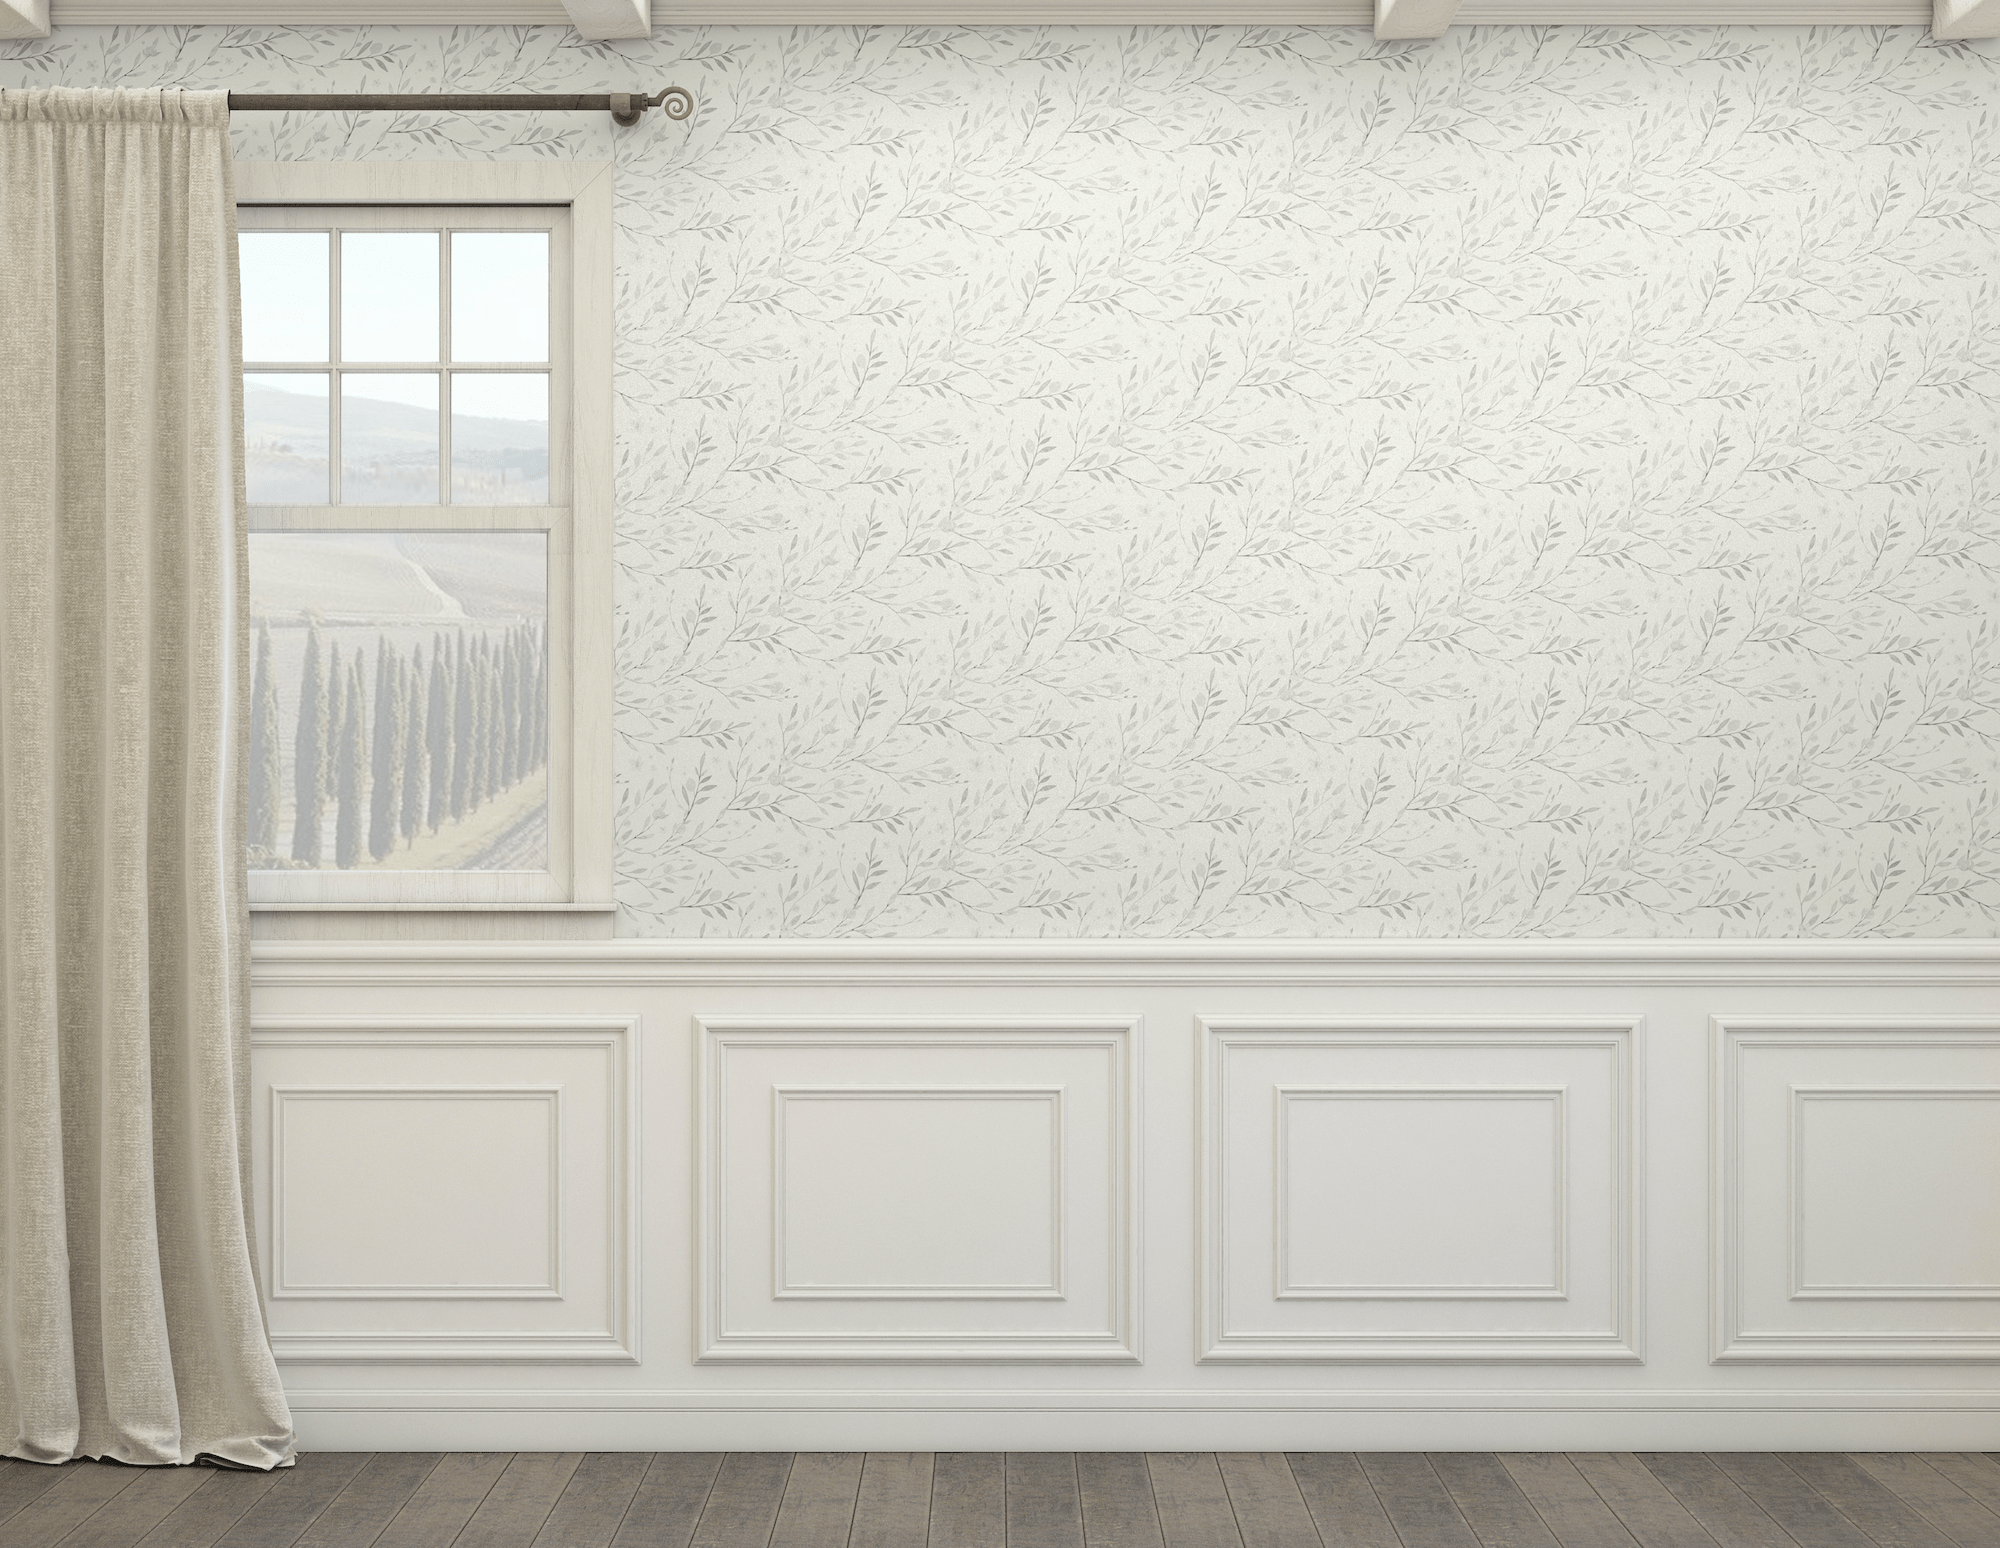 Cute Wallpaper, Peel stick, removable wallpaper for all home decor styles, Aesthetics Wallpapers. Neutral Texture Wallpaper. Texture